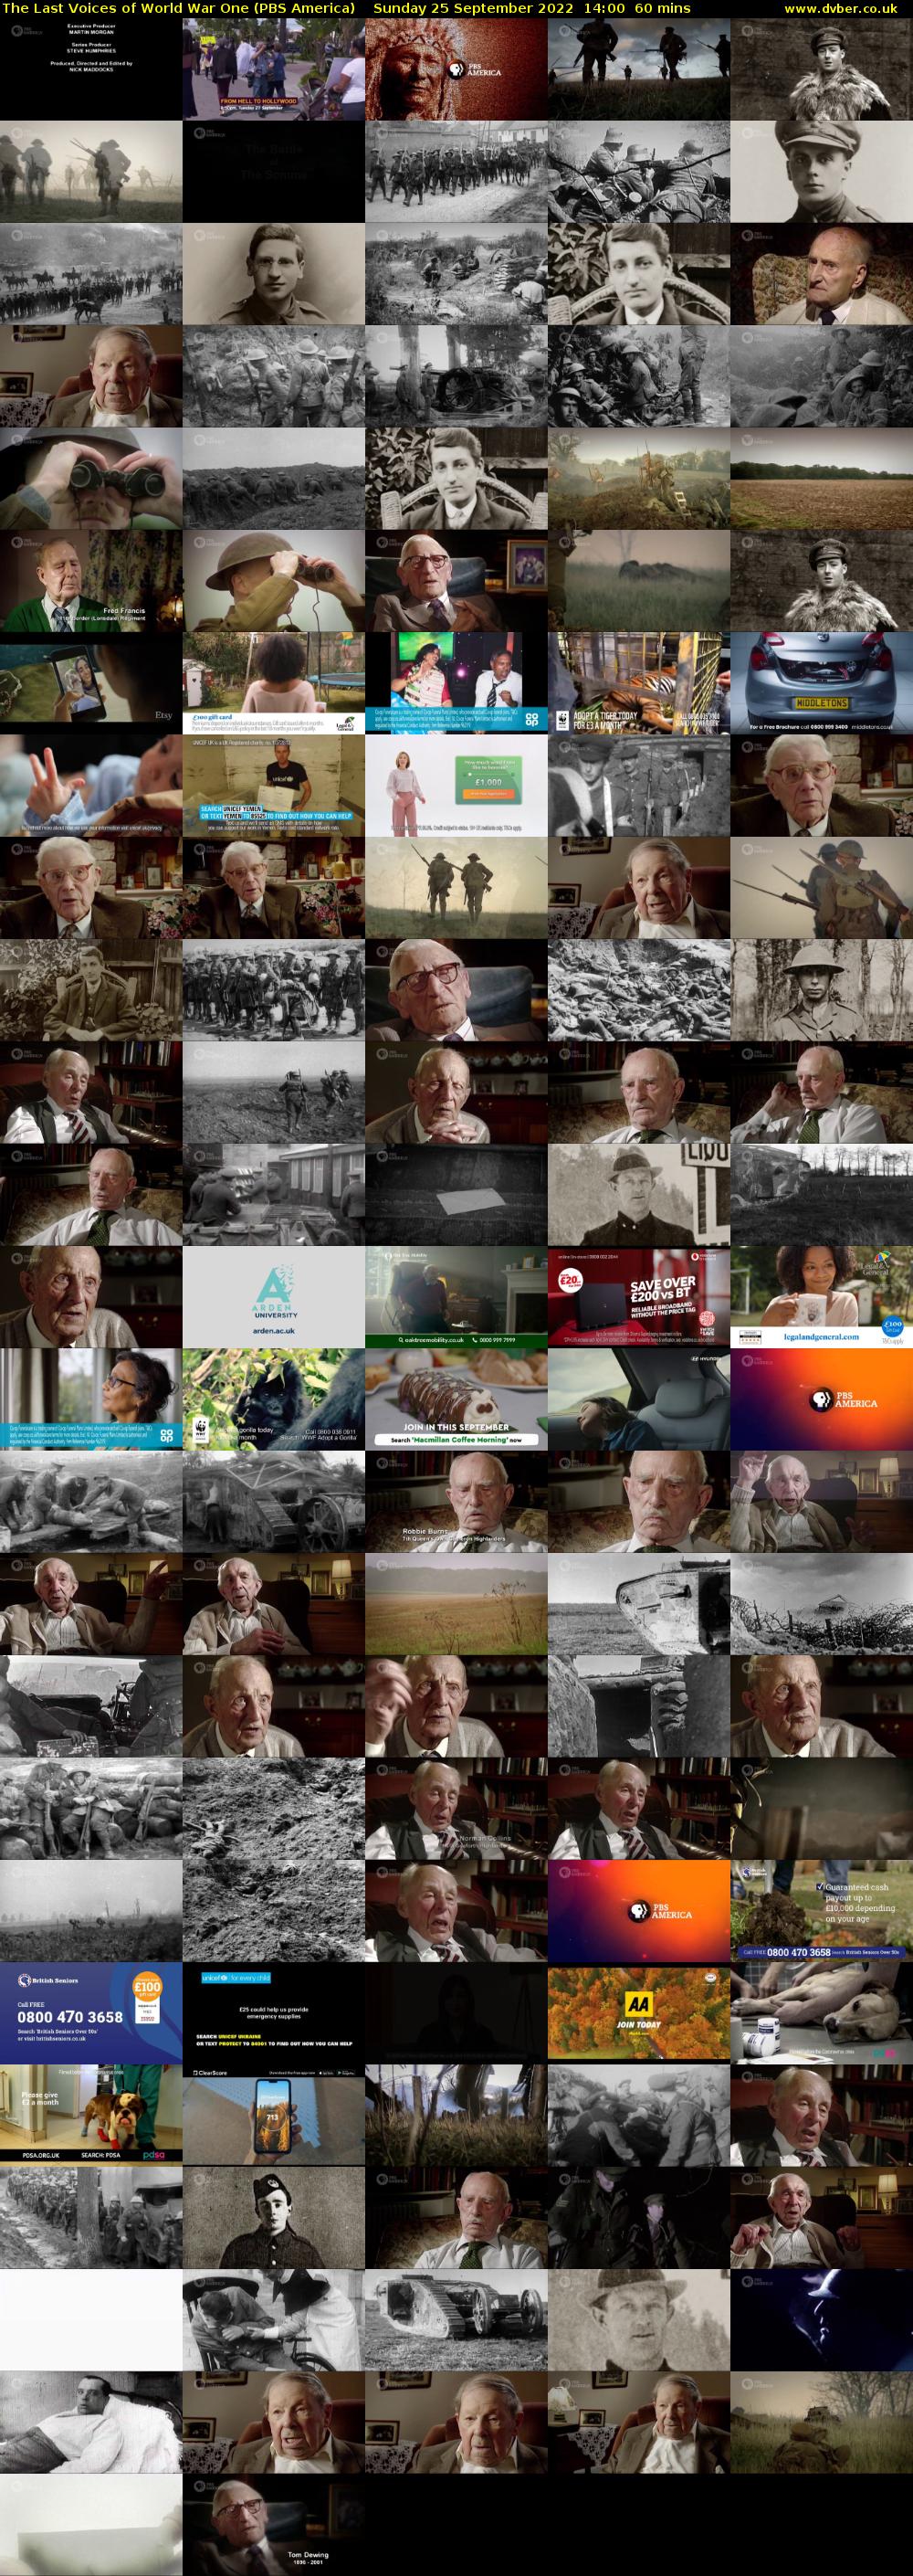 The Last Voices of World War One (PBS America) Sunday 25 September 2022 14:00 - 15:00